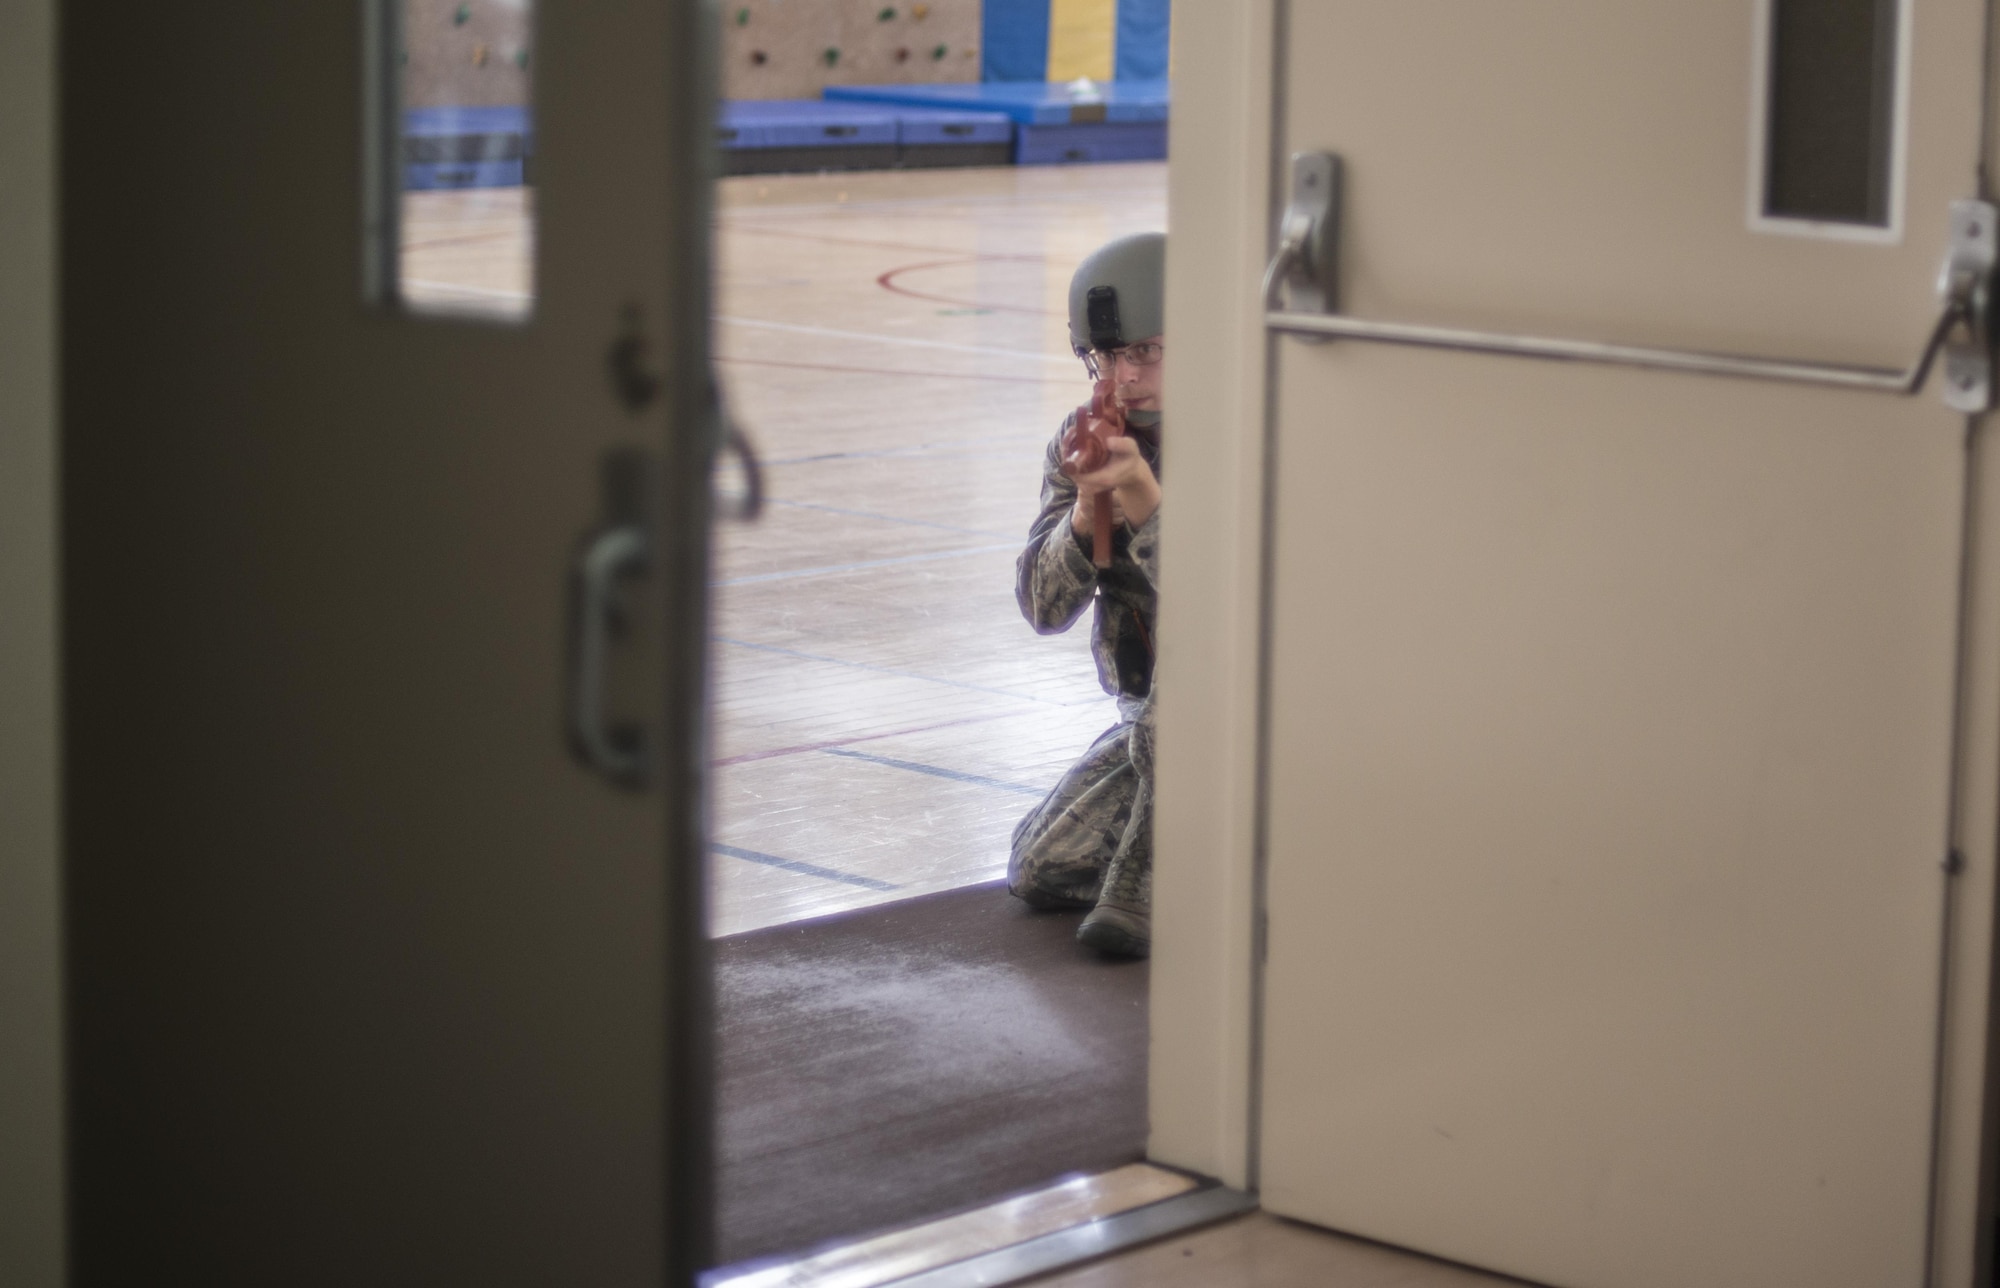 U.S. Air Force Senior Airman Zachary Justice, an alarm monitor and police two patrolman with the 35th Security Forces Squadron, guards the entryway of a gymnasium during the Beverly Sunrise 16-05 active shooter exercise held July 29, 2016, at Misawa Air Base, Japan. Justice was one of six team members who cleared the building where the active shooter exercise was held. (U.S. Air Force photo by Senior Airman Brittany A. Chase)